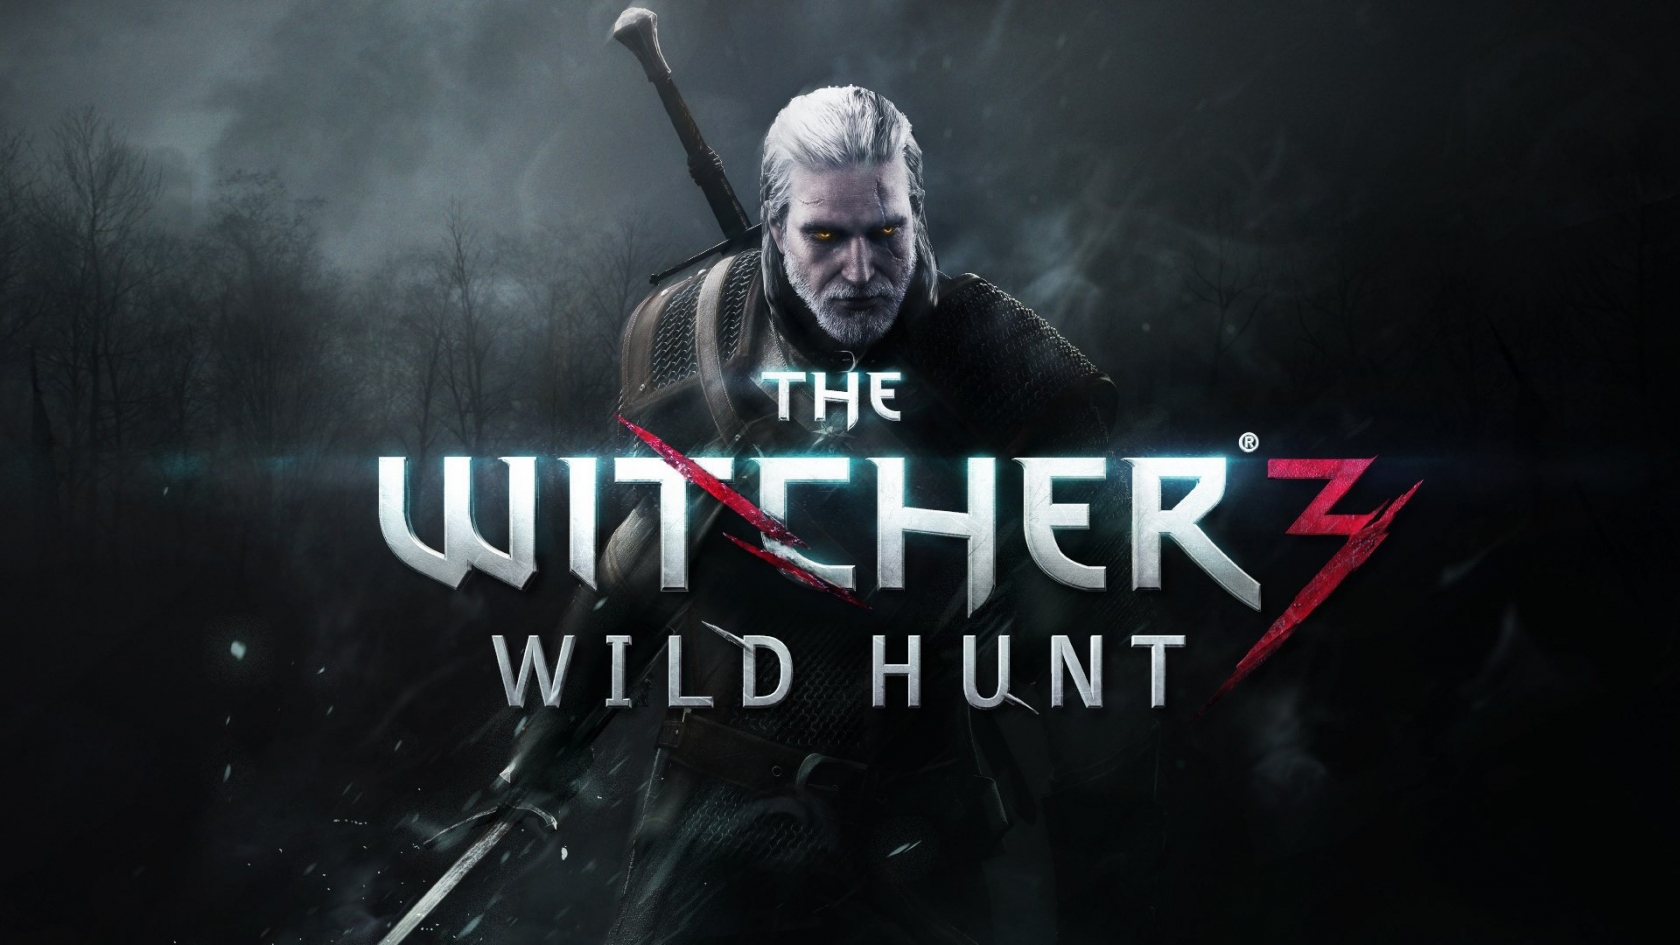 The Witcher 3 for 1680 x 945 HDTV resolution